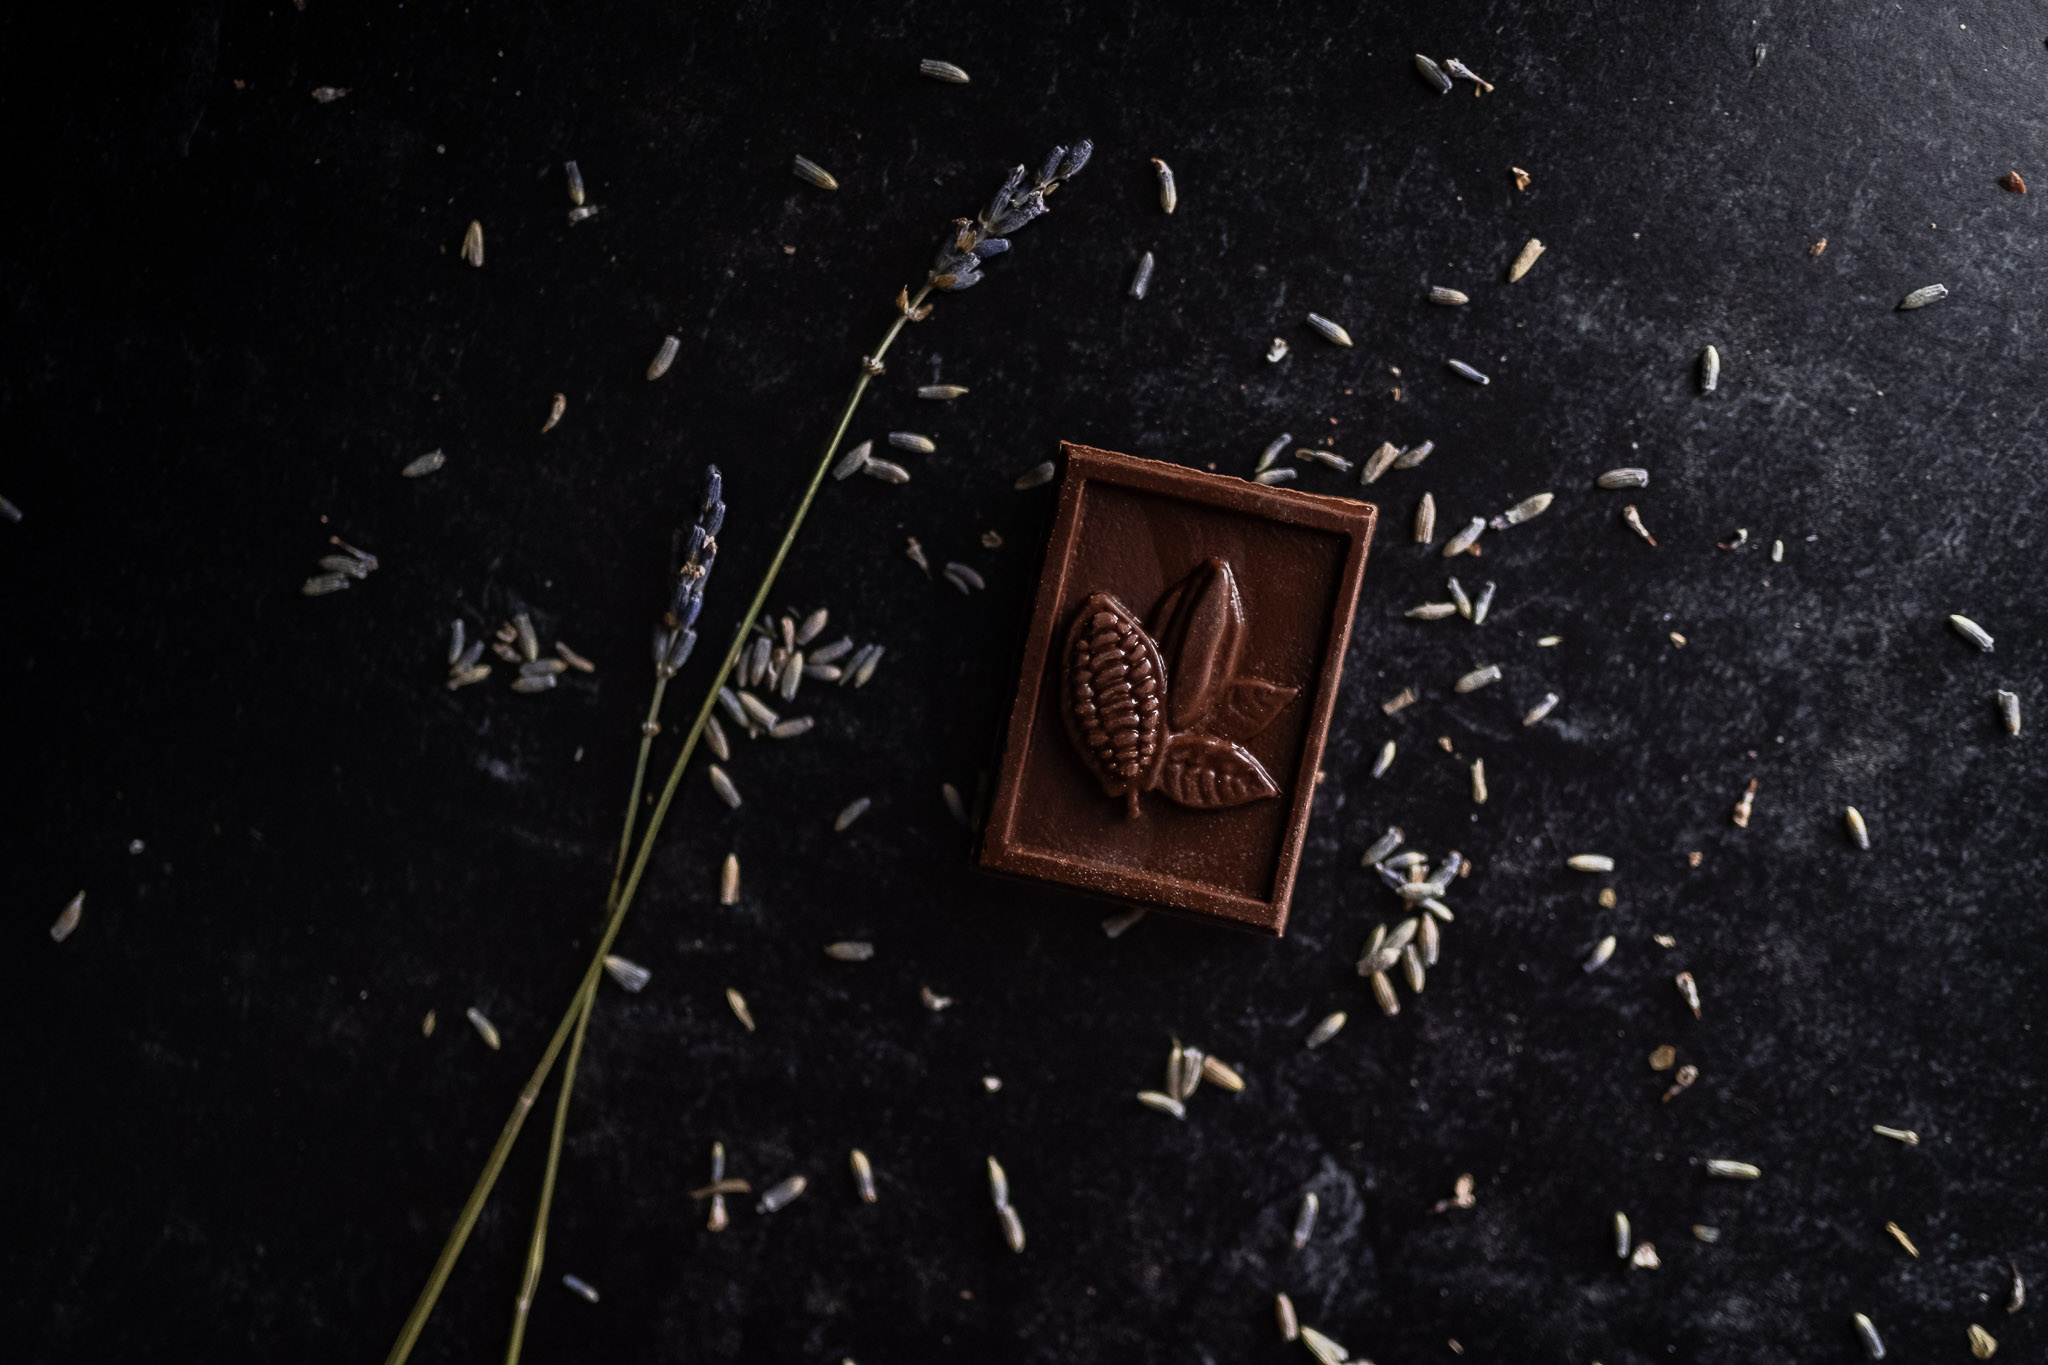 Charlotte Product Food Photography Small Business Branding Carrie Allen Village Chocolate Co Canada